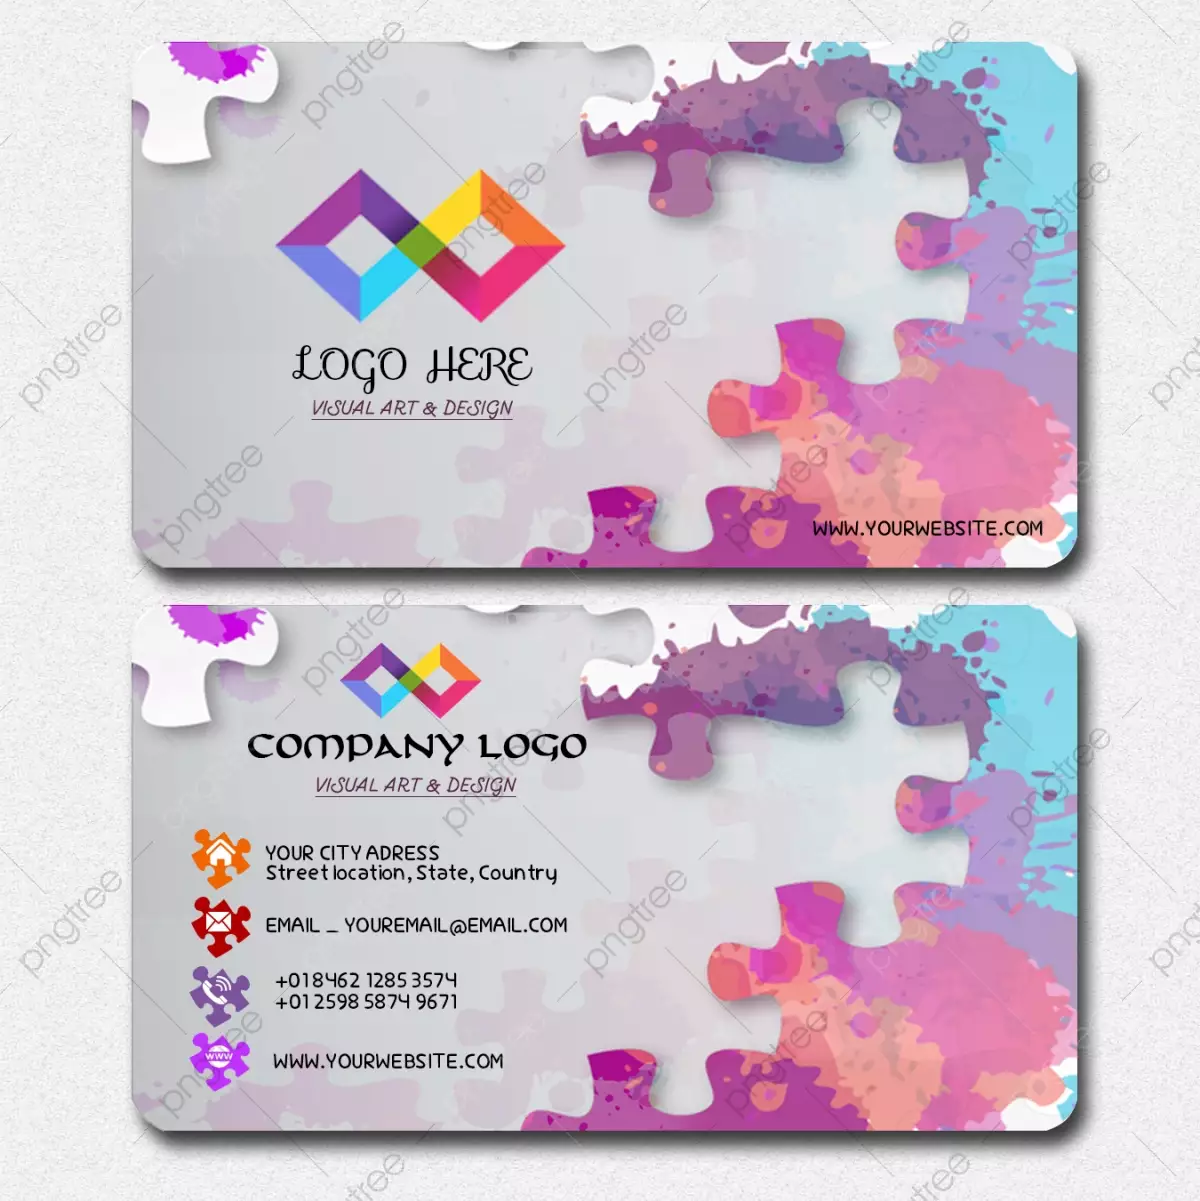 Puzzle Business Card Template Download on Pngtree